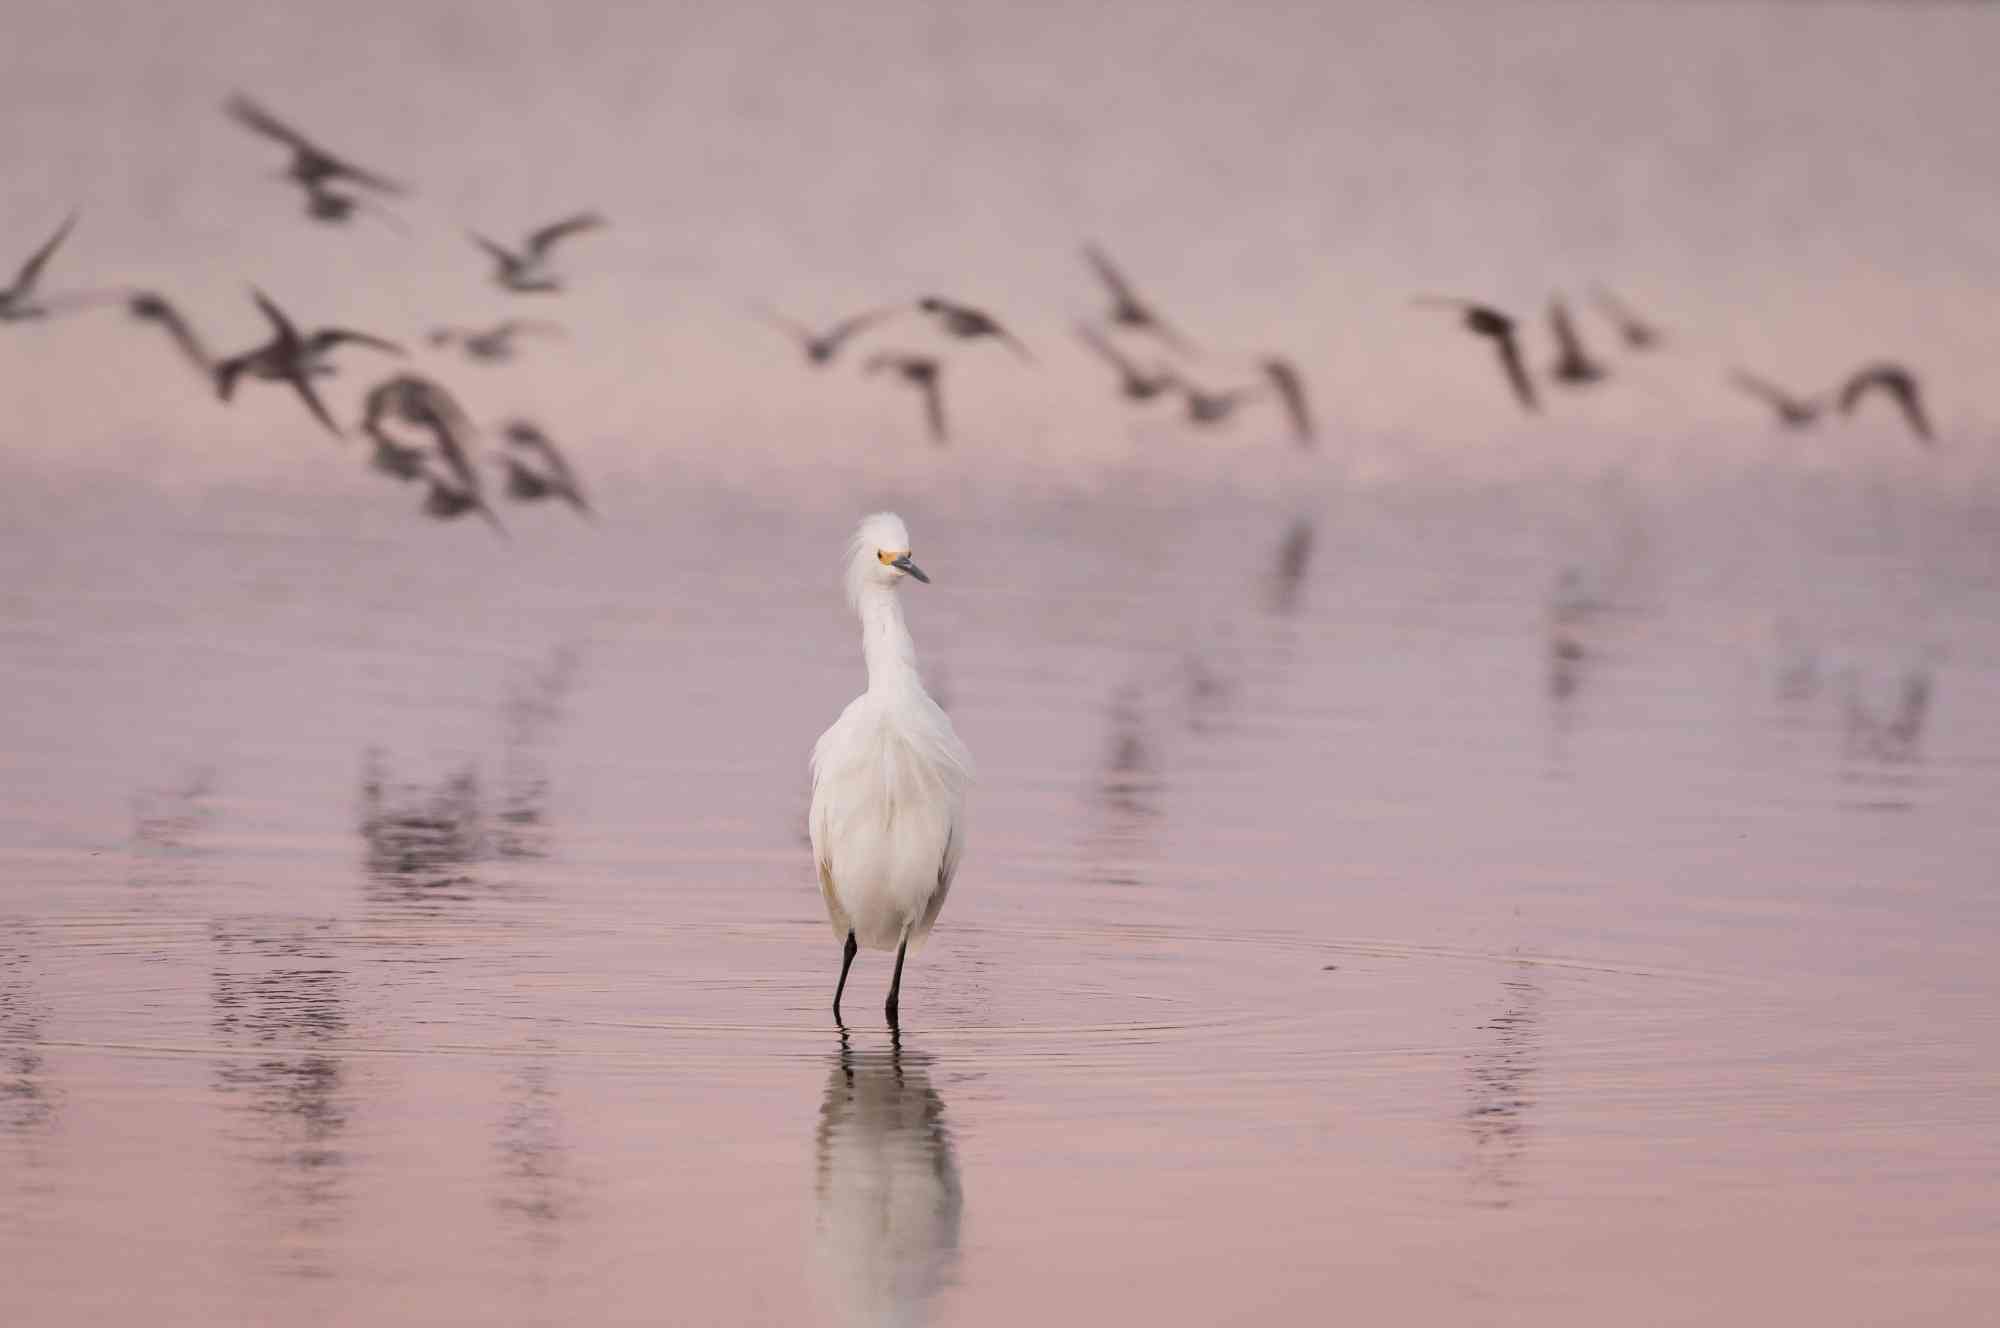 Snowy Egret wading with flying birds in background